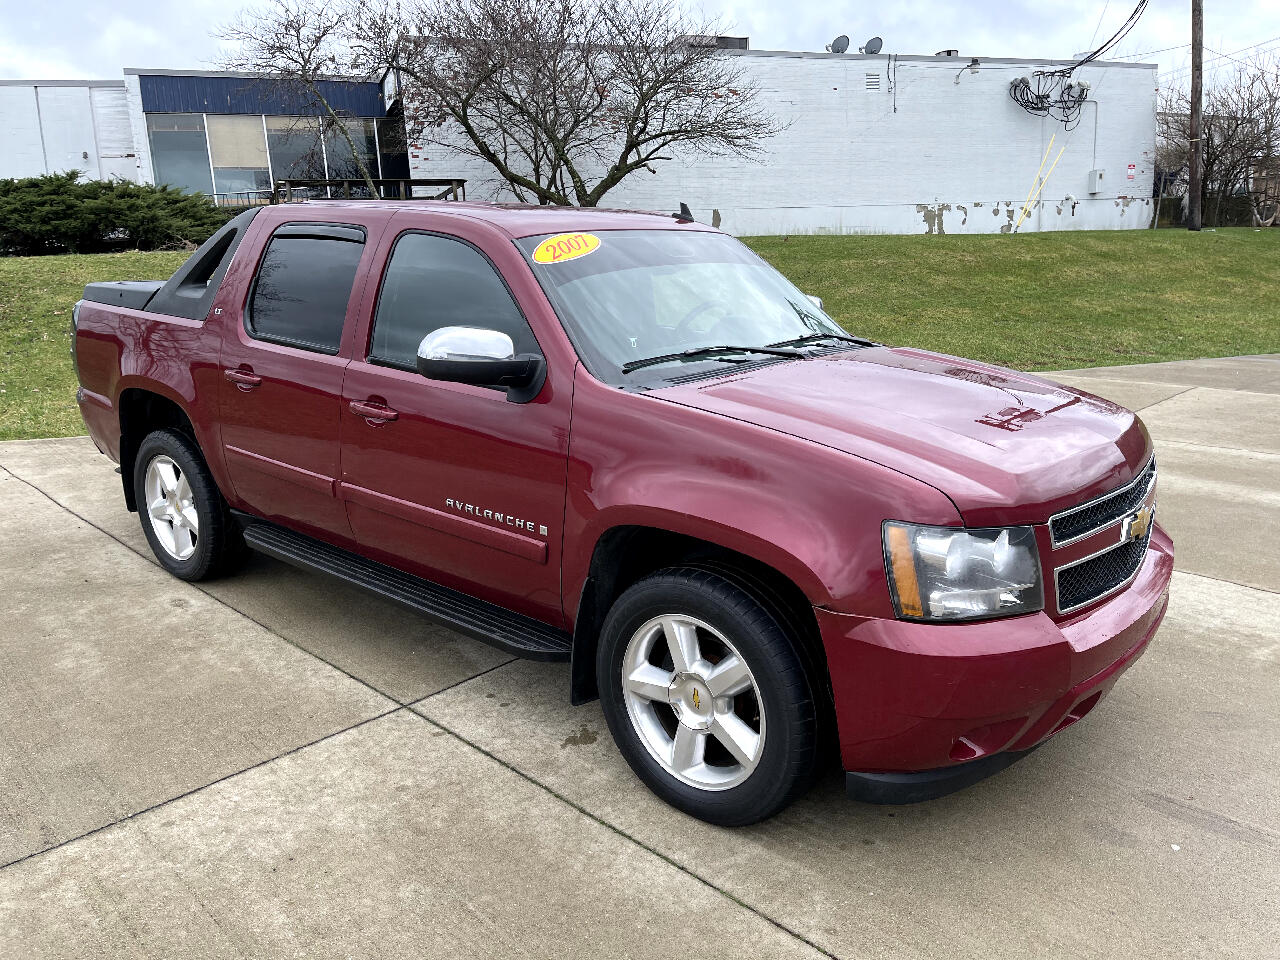 Used 2007 Chevrolet Avalanche LTZ 2WD for Sale in Lexington KY 40505 Best  Buy Automart II